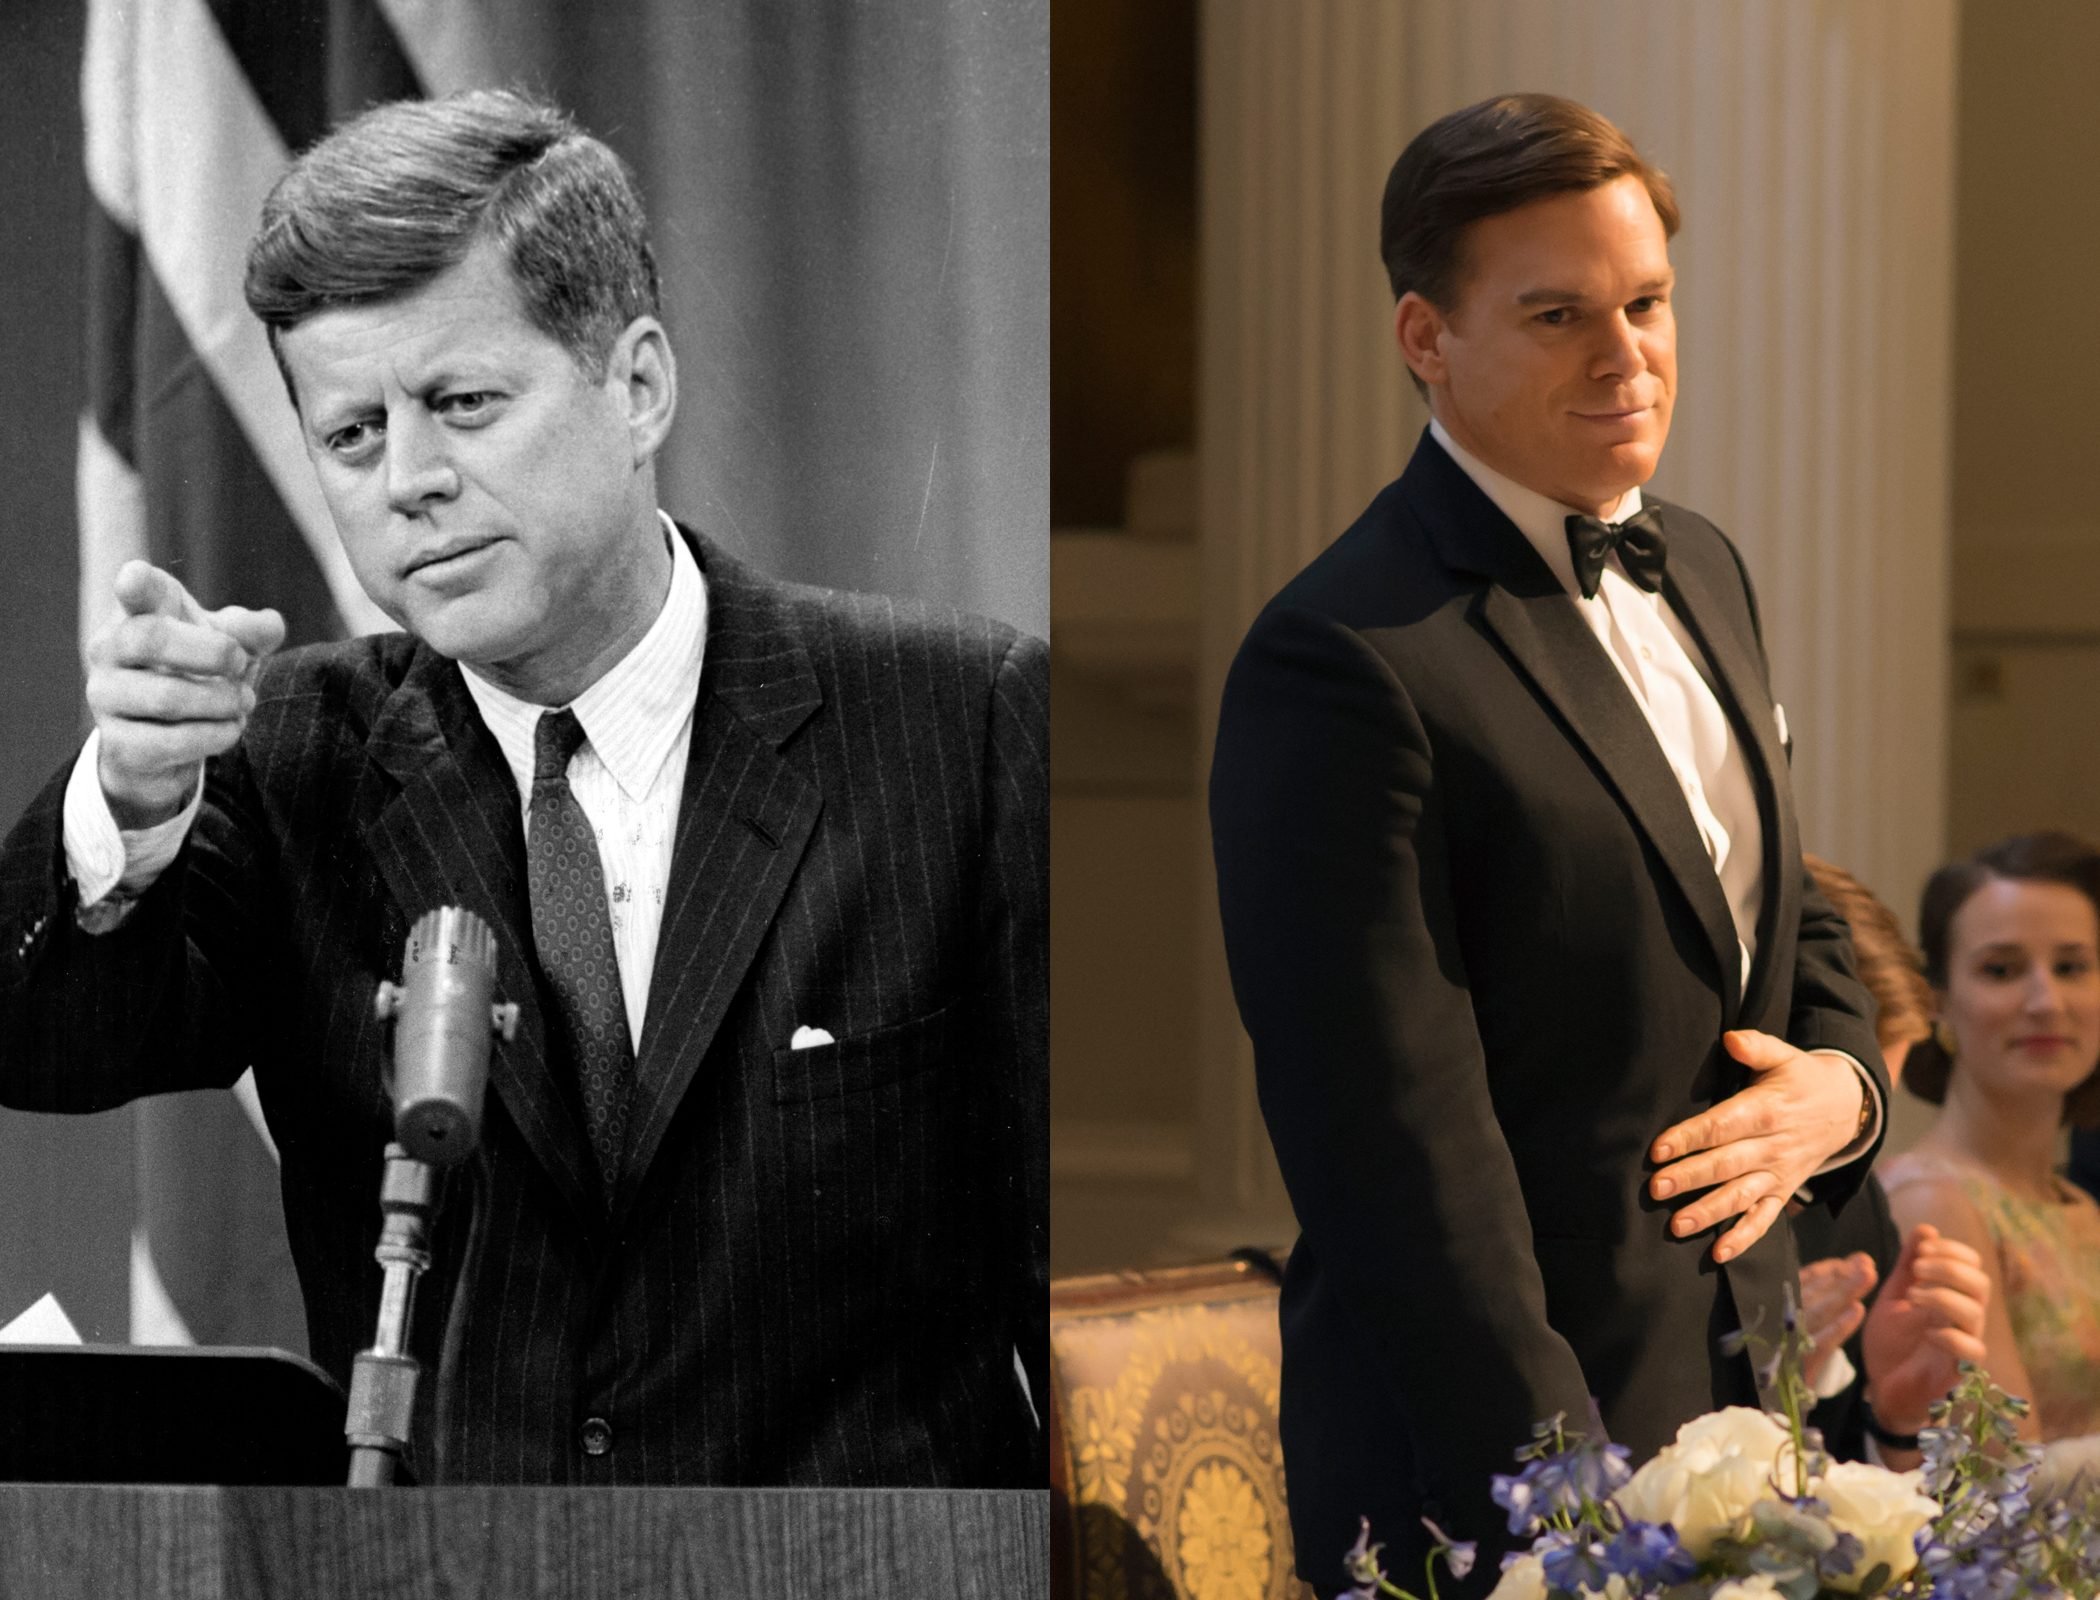 John F. Kennedy played by Michael C. Hall on Netflixs The Crown